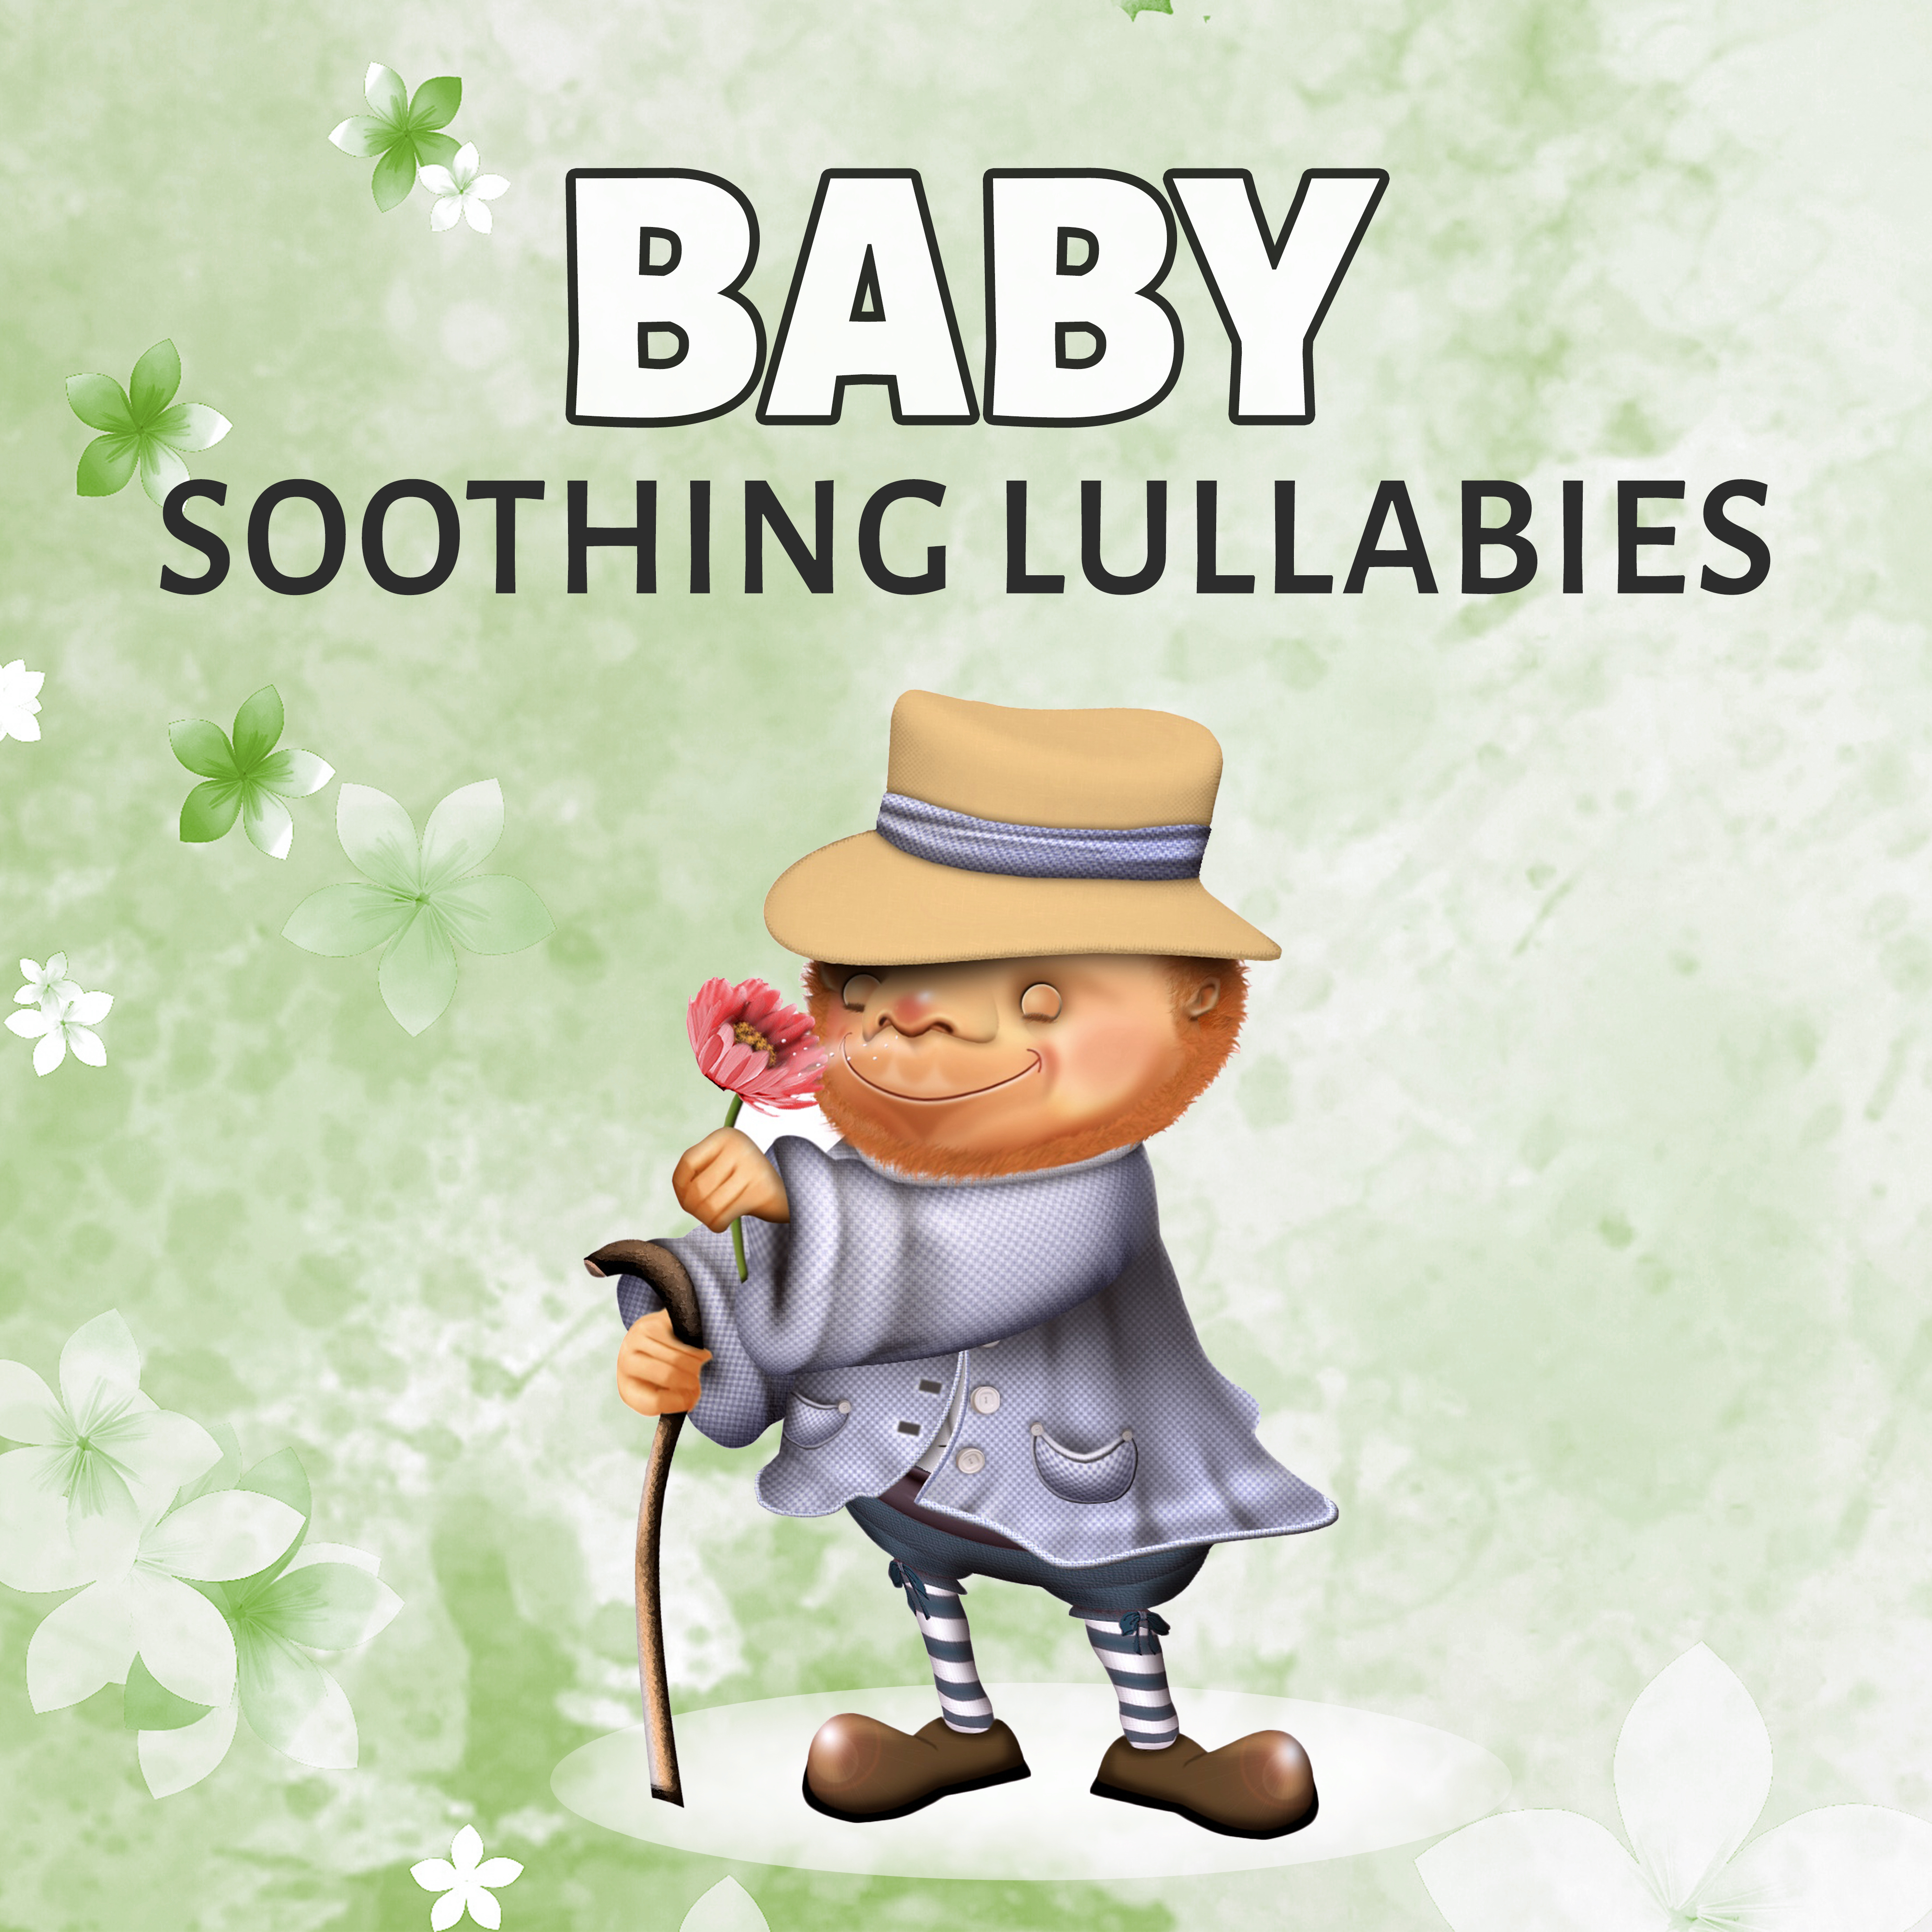 Baby Soothing Lullabies -  Relaxing Nature Music, Gentle Sound Loops for Baby Sleeping, Peaceful Piano Music, Sounds of Ocean Waves, Rain, Soothing Sounds